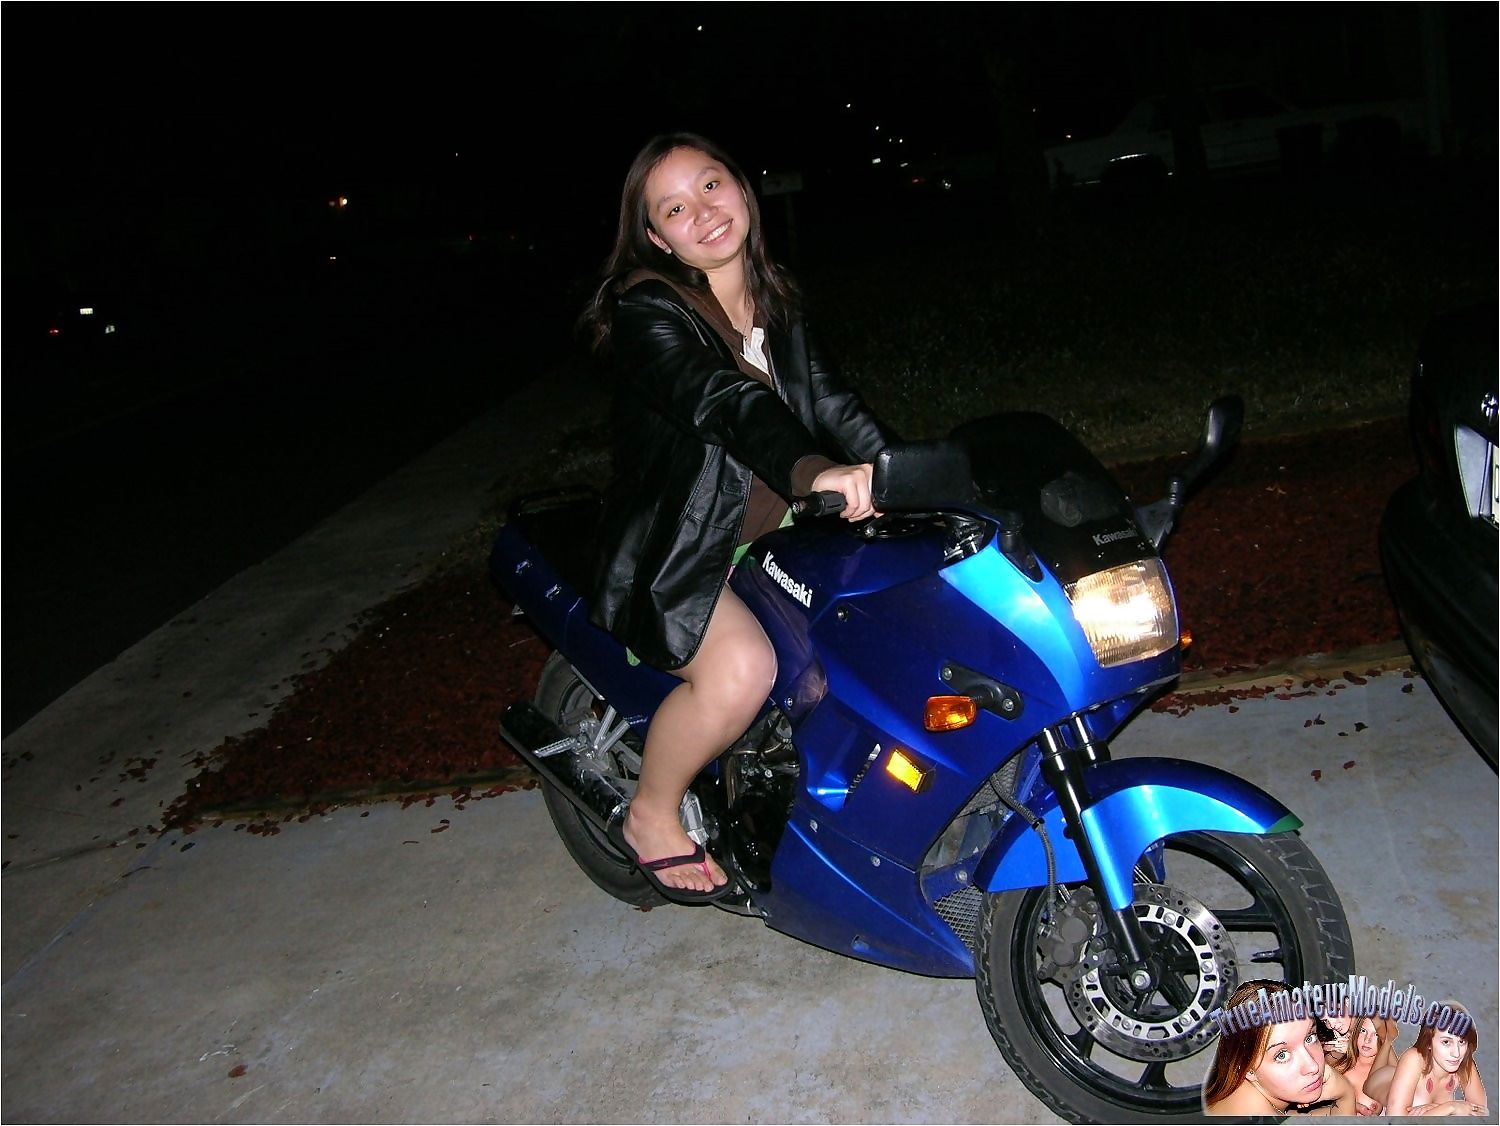 Amateur teen girl spreads nude on motorcycle - part 1731 page 1